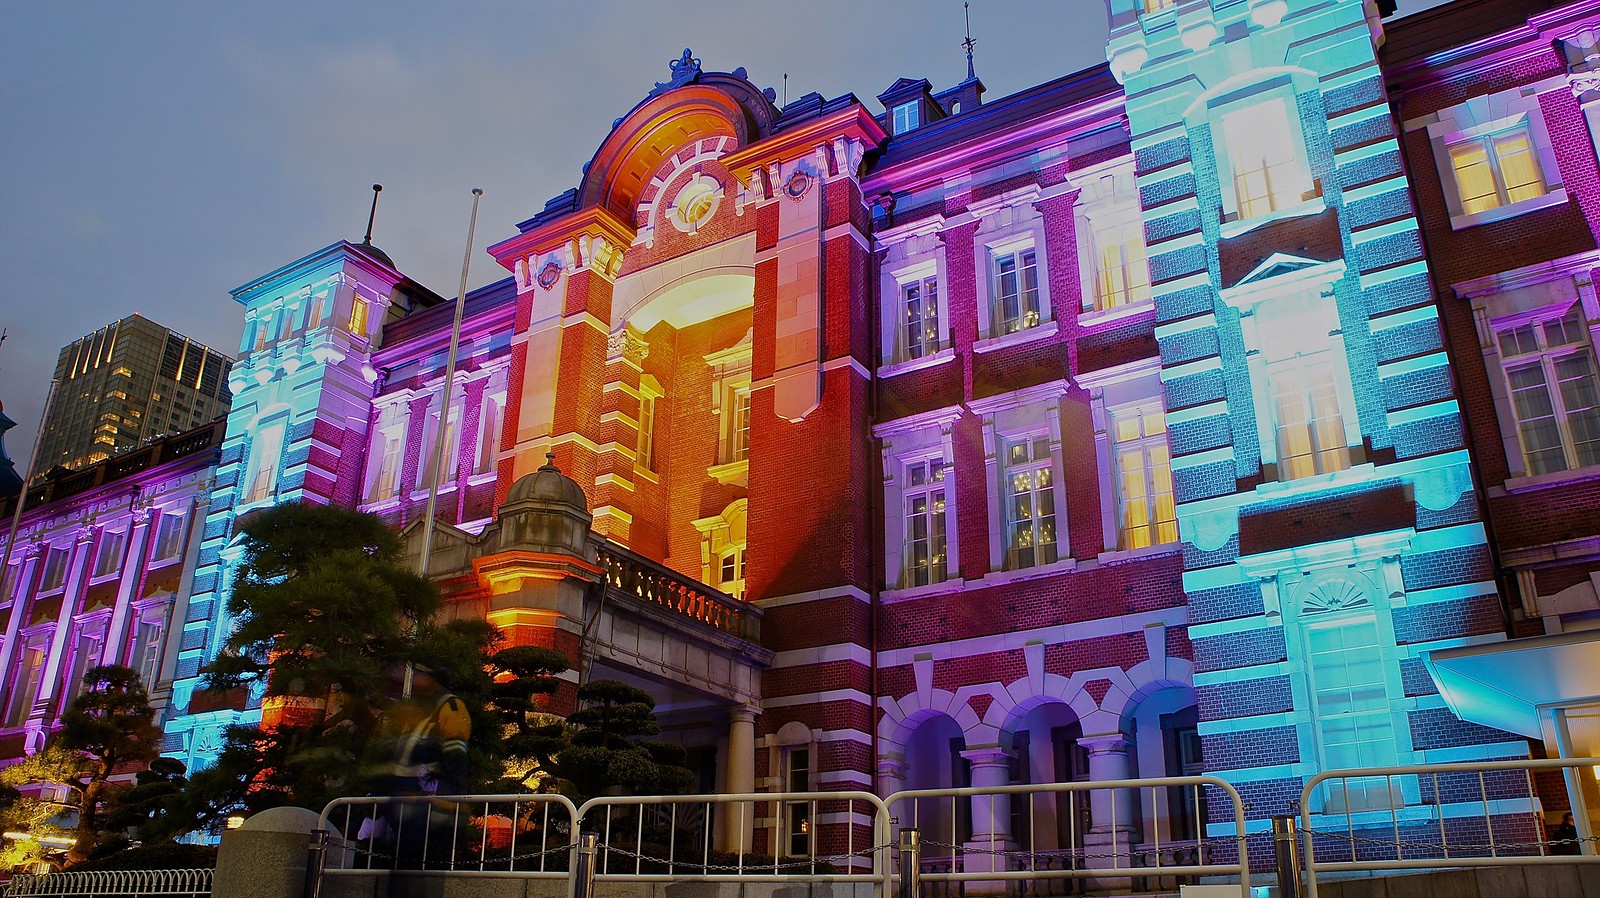 Light up at the 100th anniversary of JR Tokyo Station.